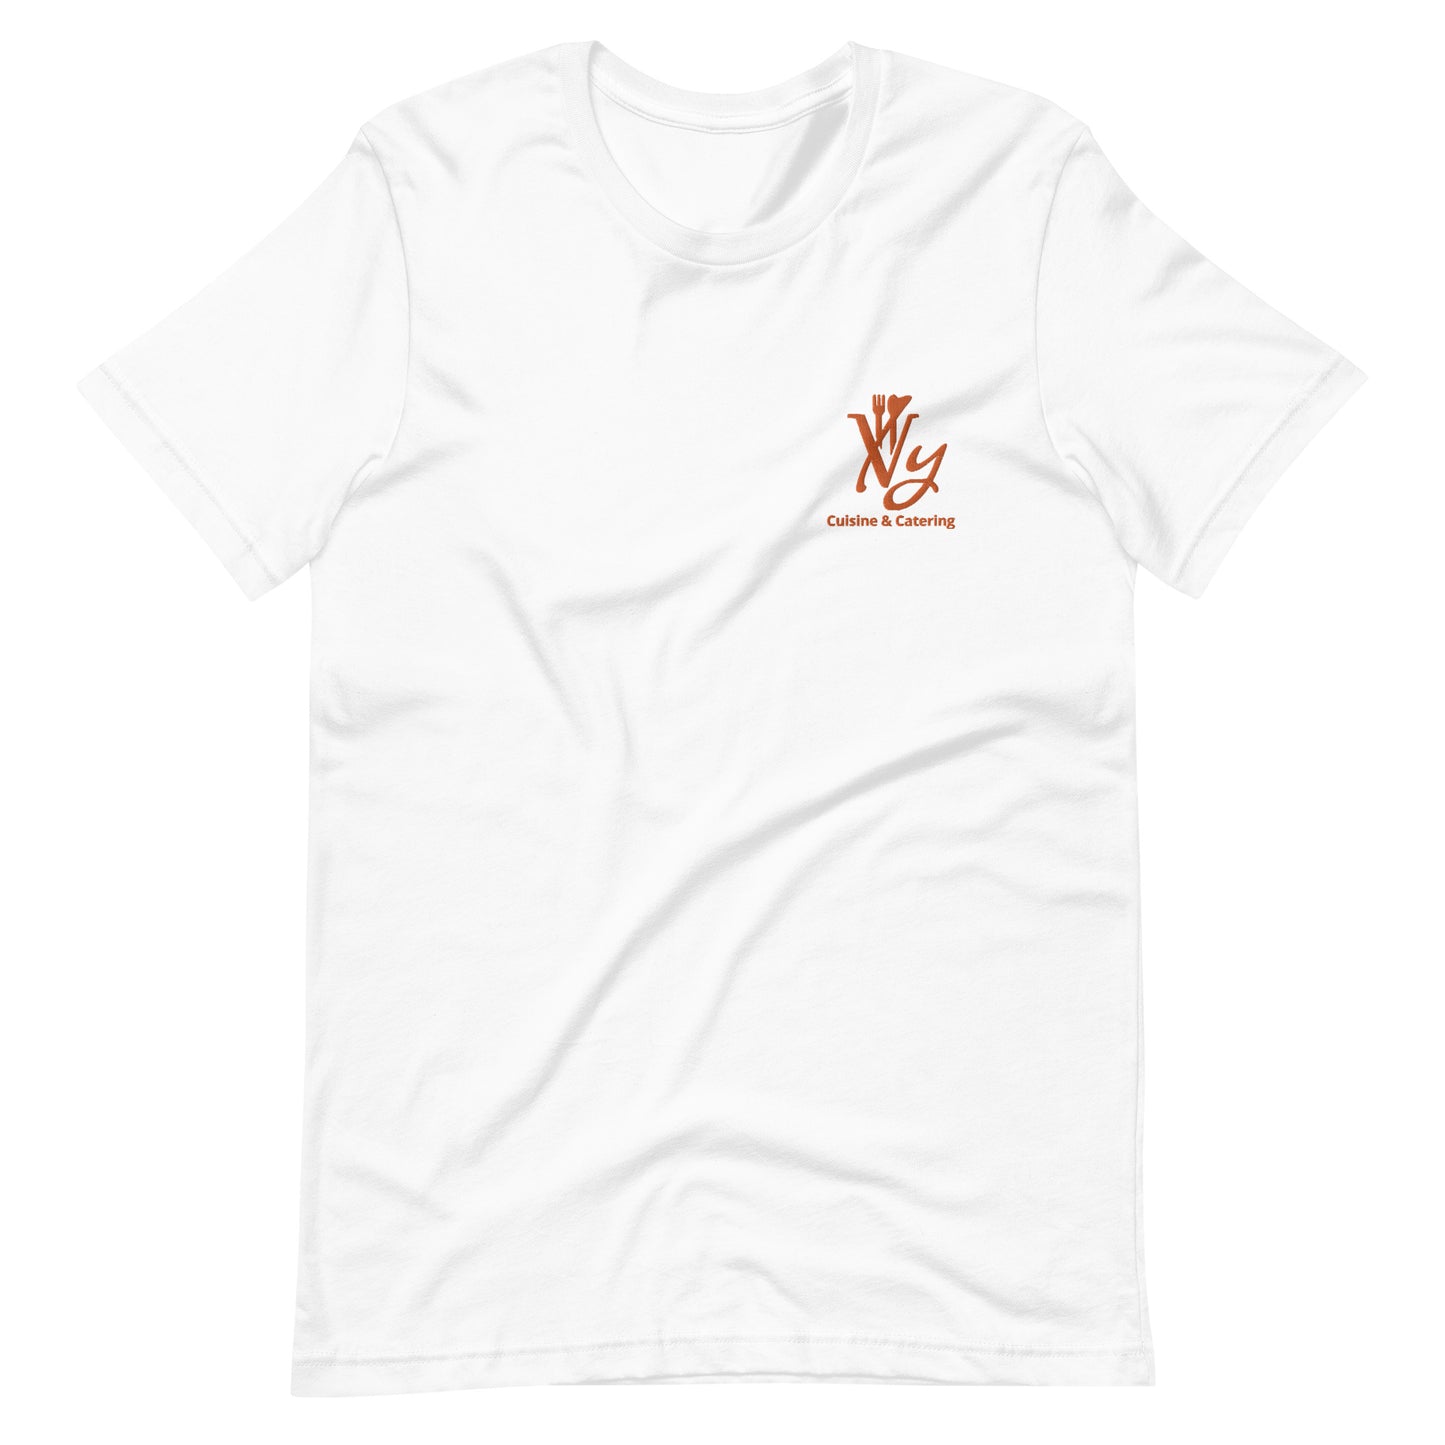 Ivy Cuisine & Catering Womens embroidered t-shirt